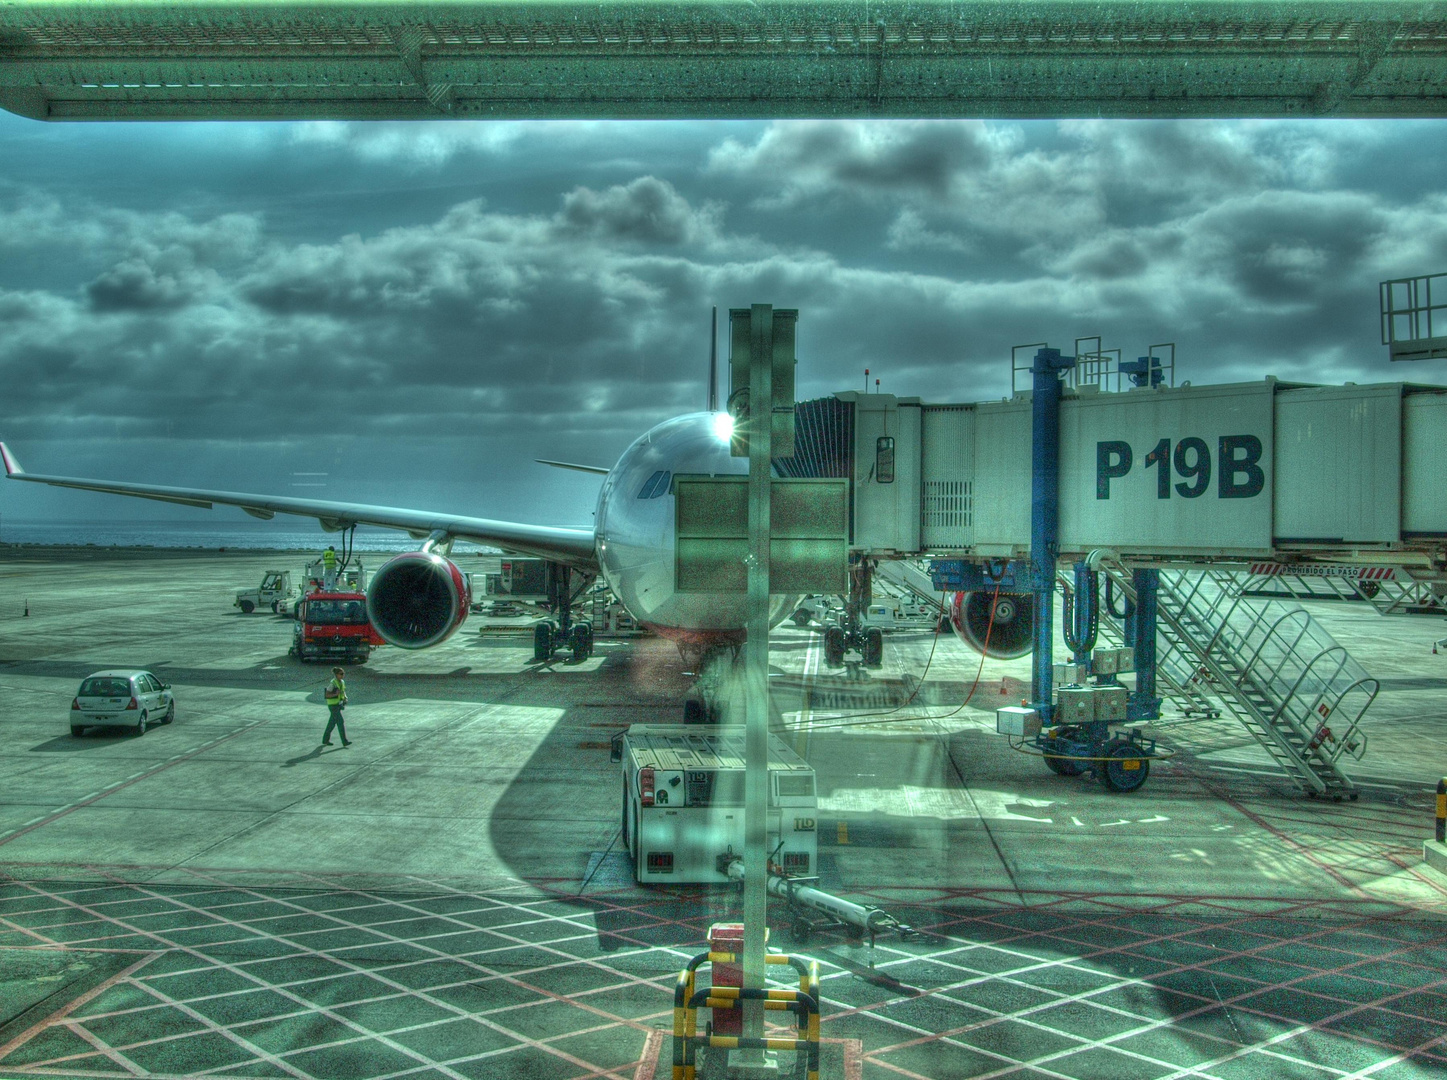 A 330-300 HDR